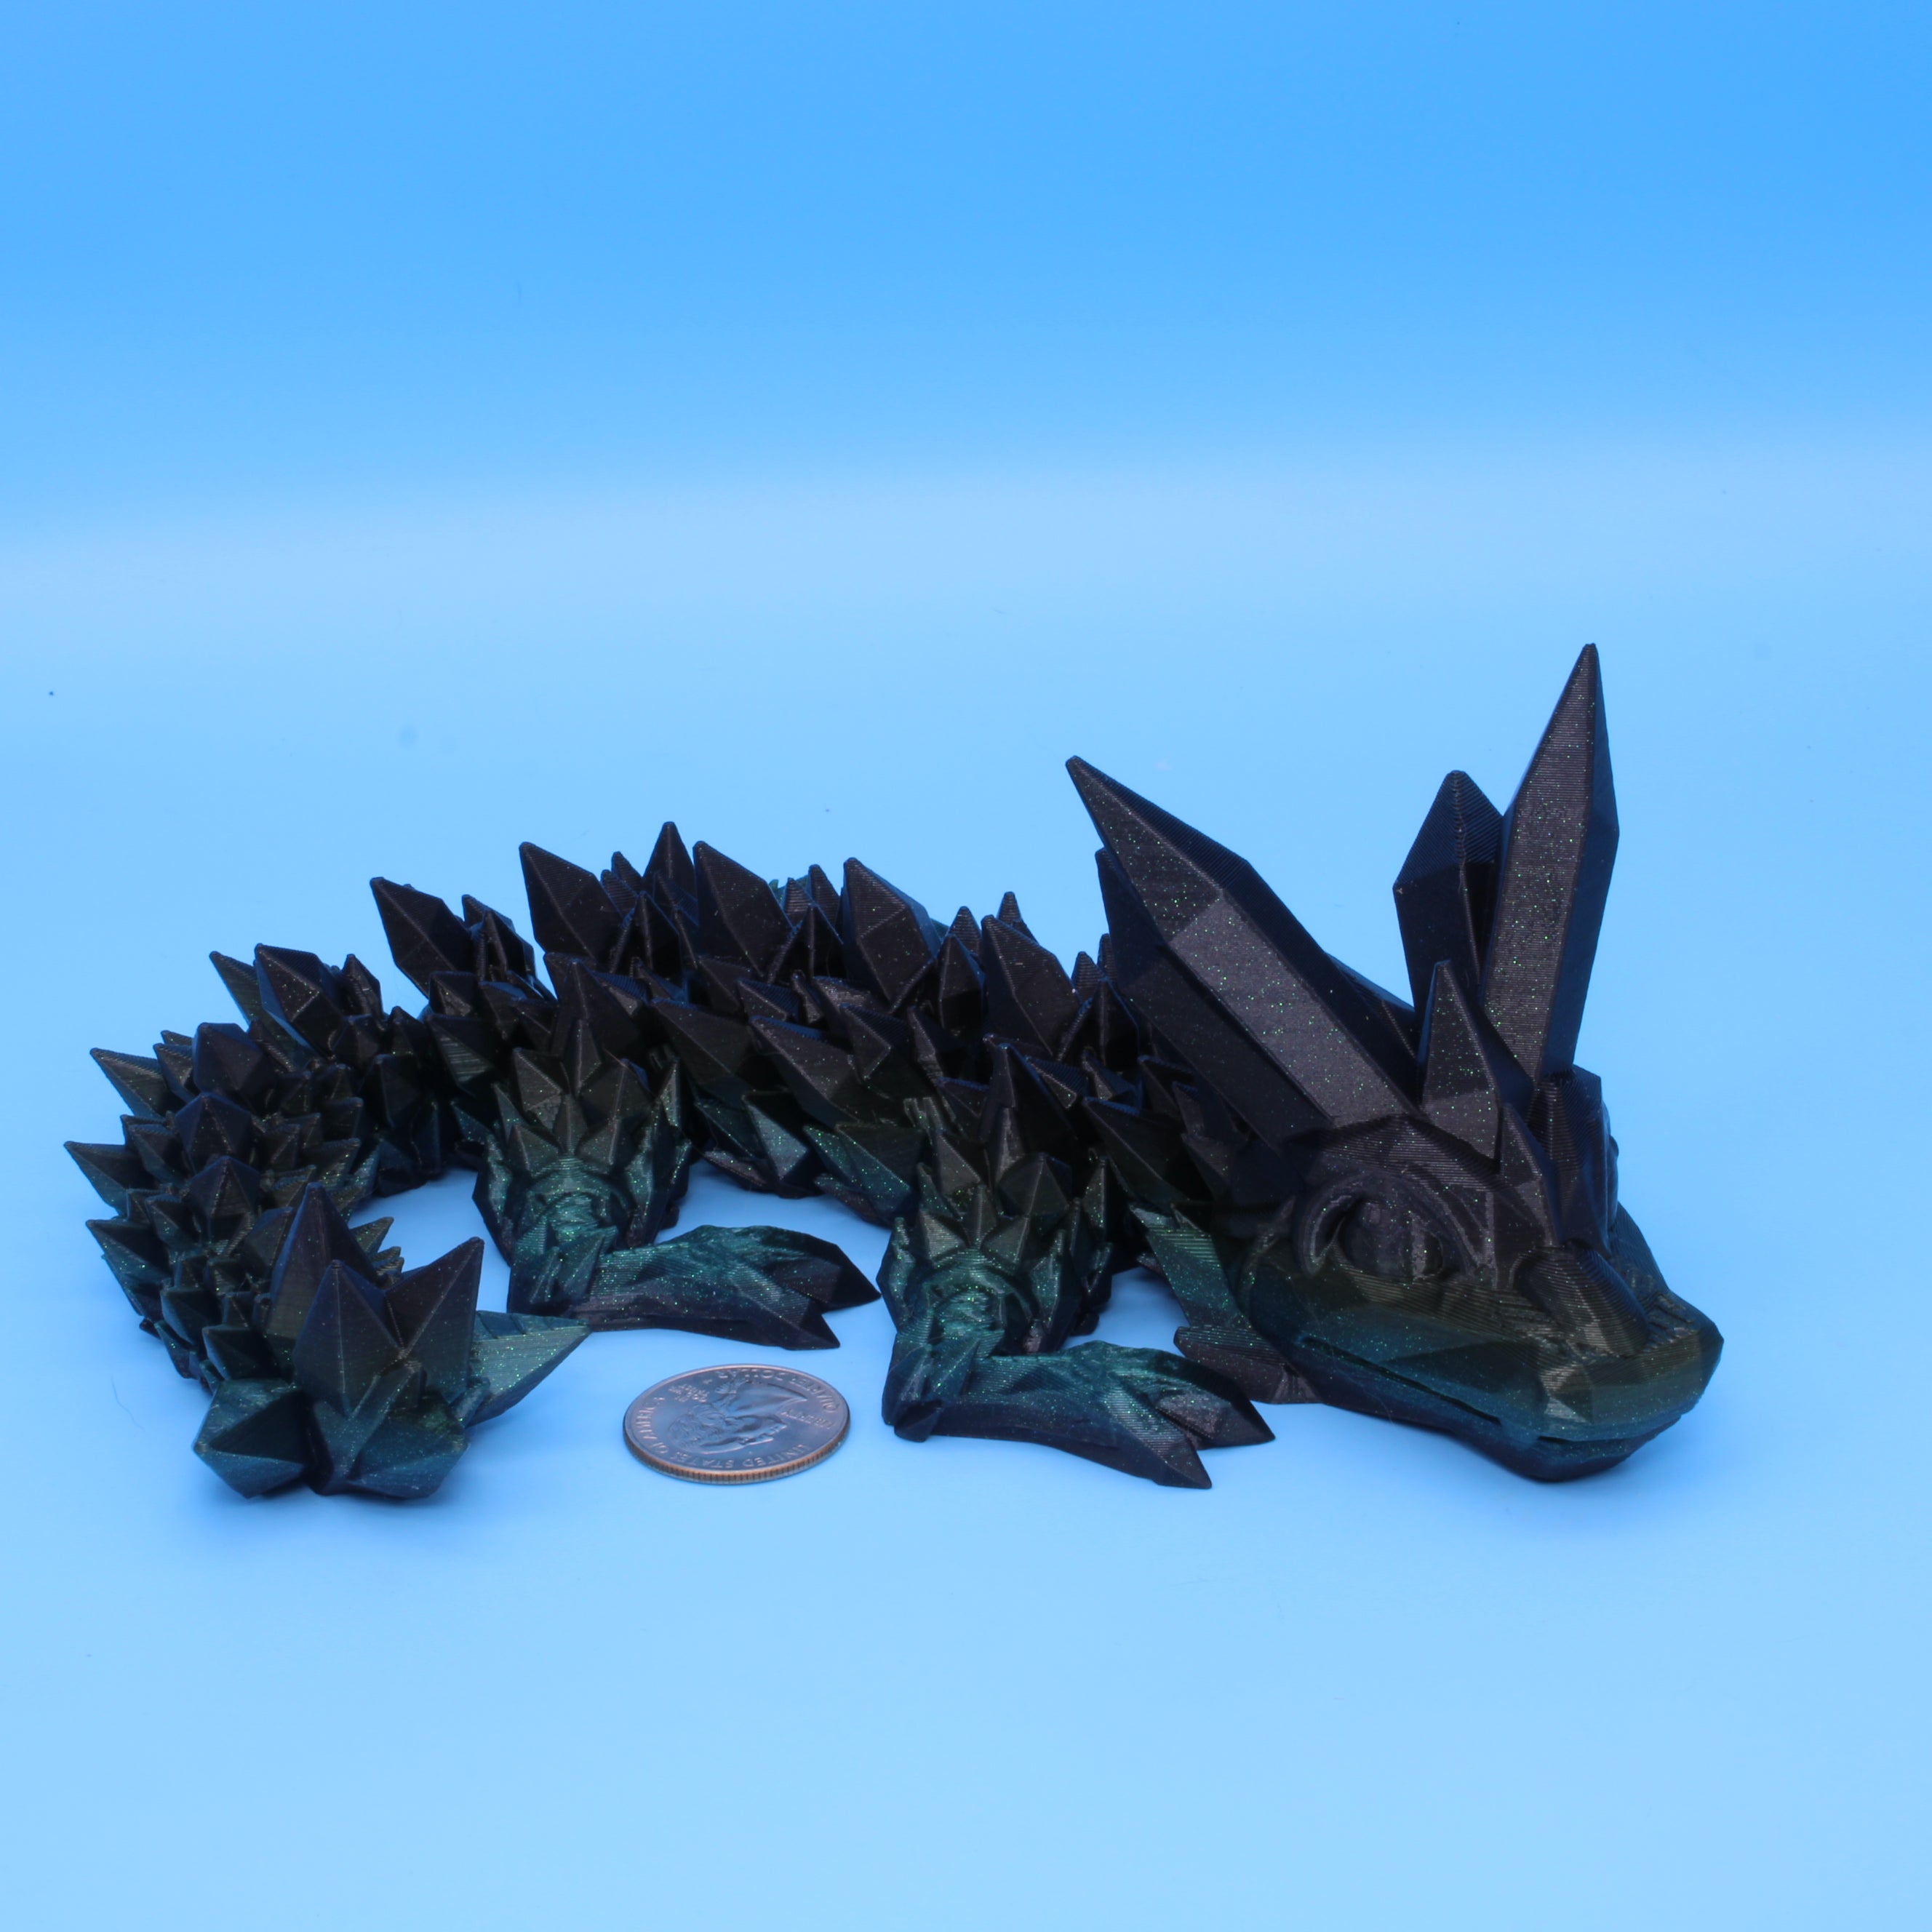 Baby Cryst Dragon Figurine - Surprise! 11.5 inch. (100% scale)